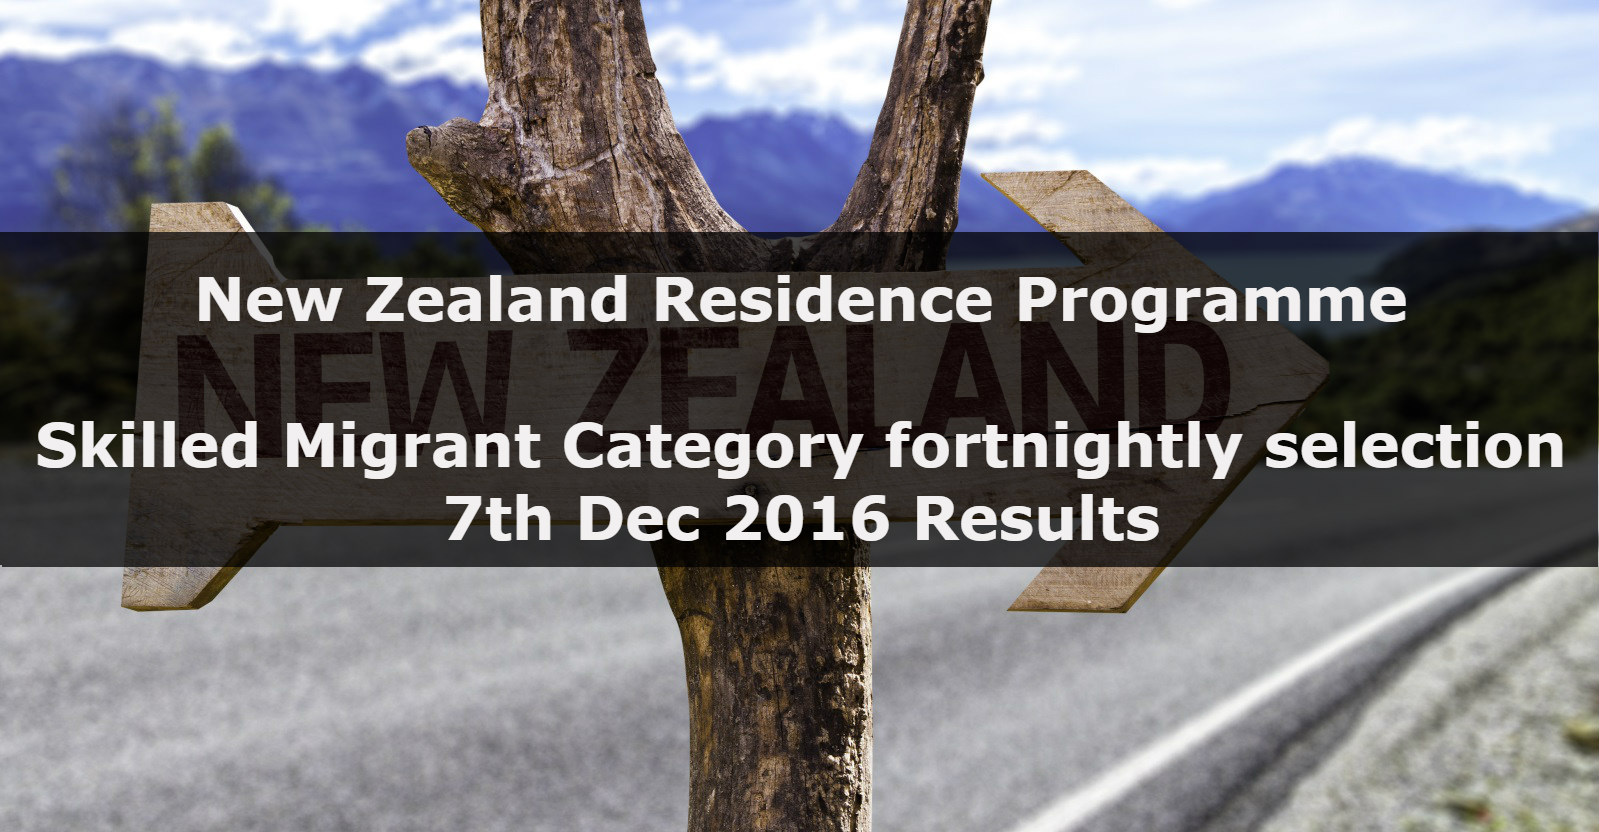 New Zealand Residence Programme – Skilled Migrant Category fortnightly selection – 7th Dec 2016 Results